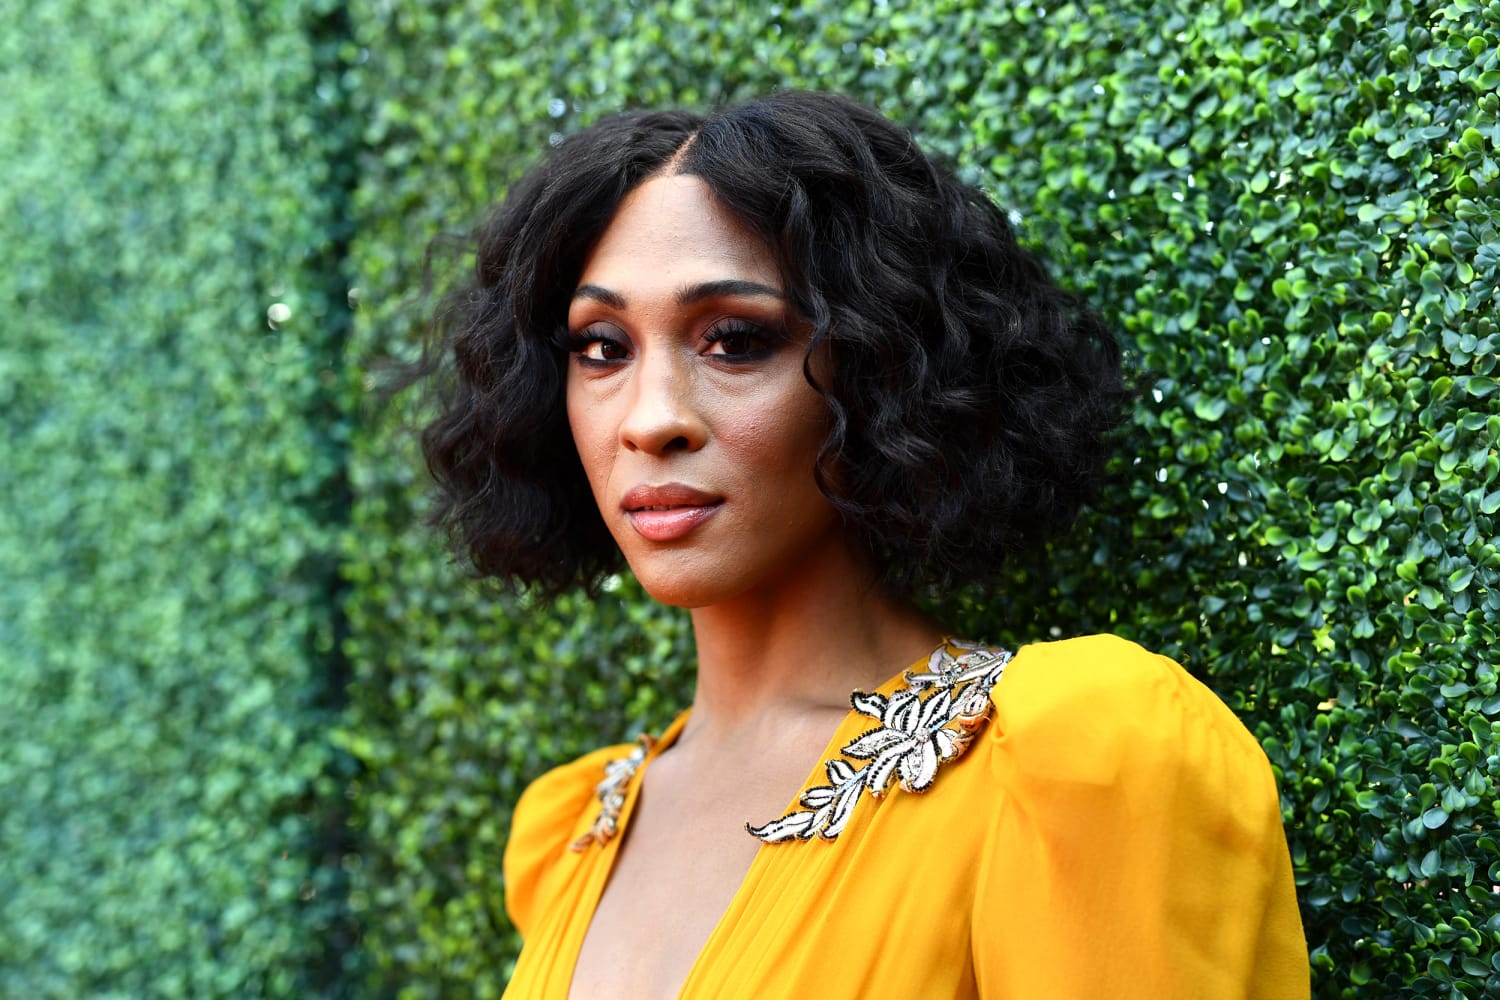 Mj Rodriguez becomes 1st transgender actor to win a Golden Globe